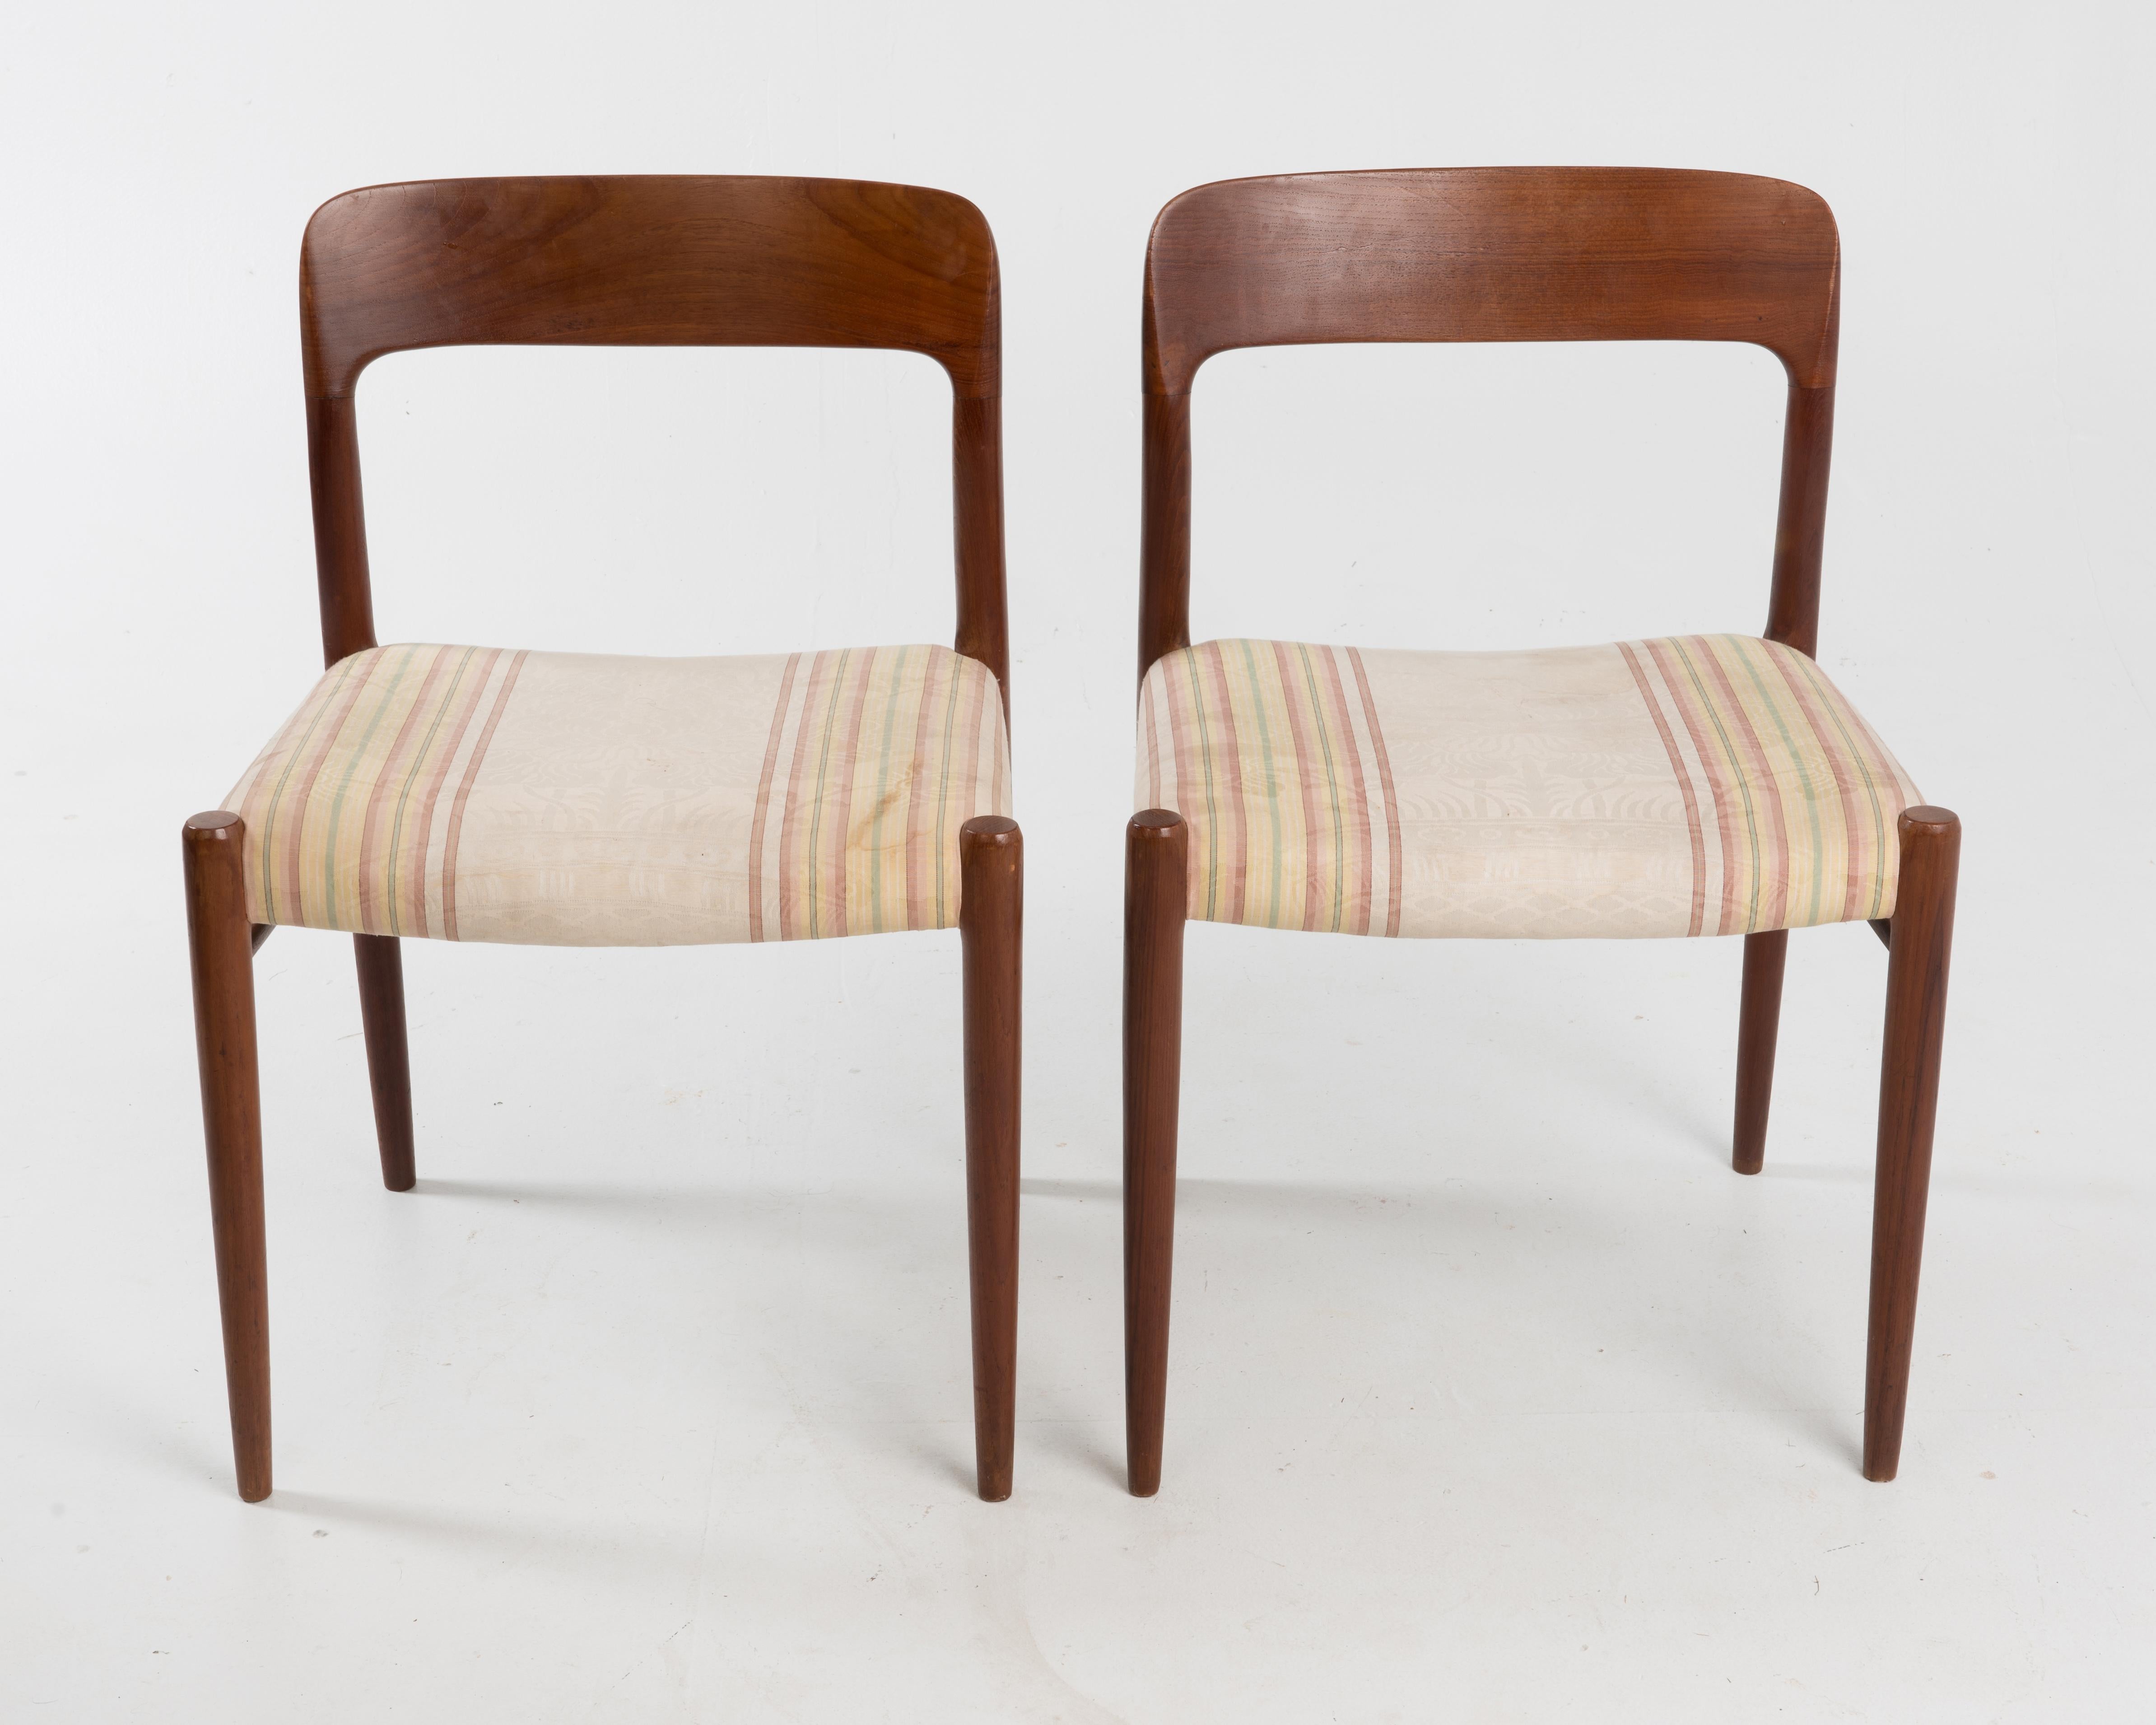 Niels Möller for J.L. Möllers Style Modell 75 Danish Teak Dining Chairs, Pair 1